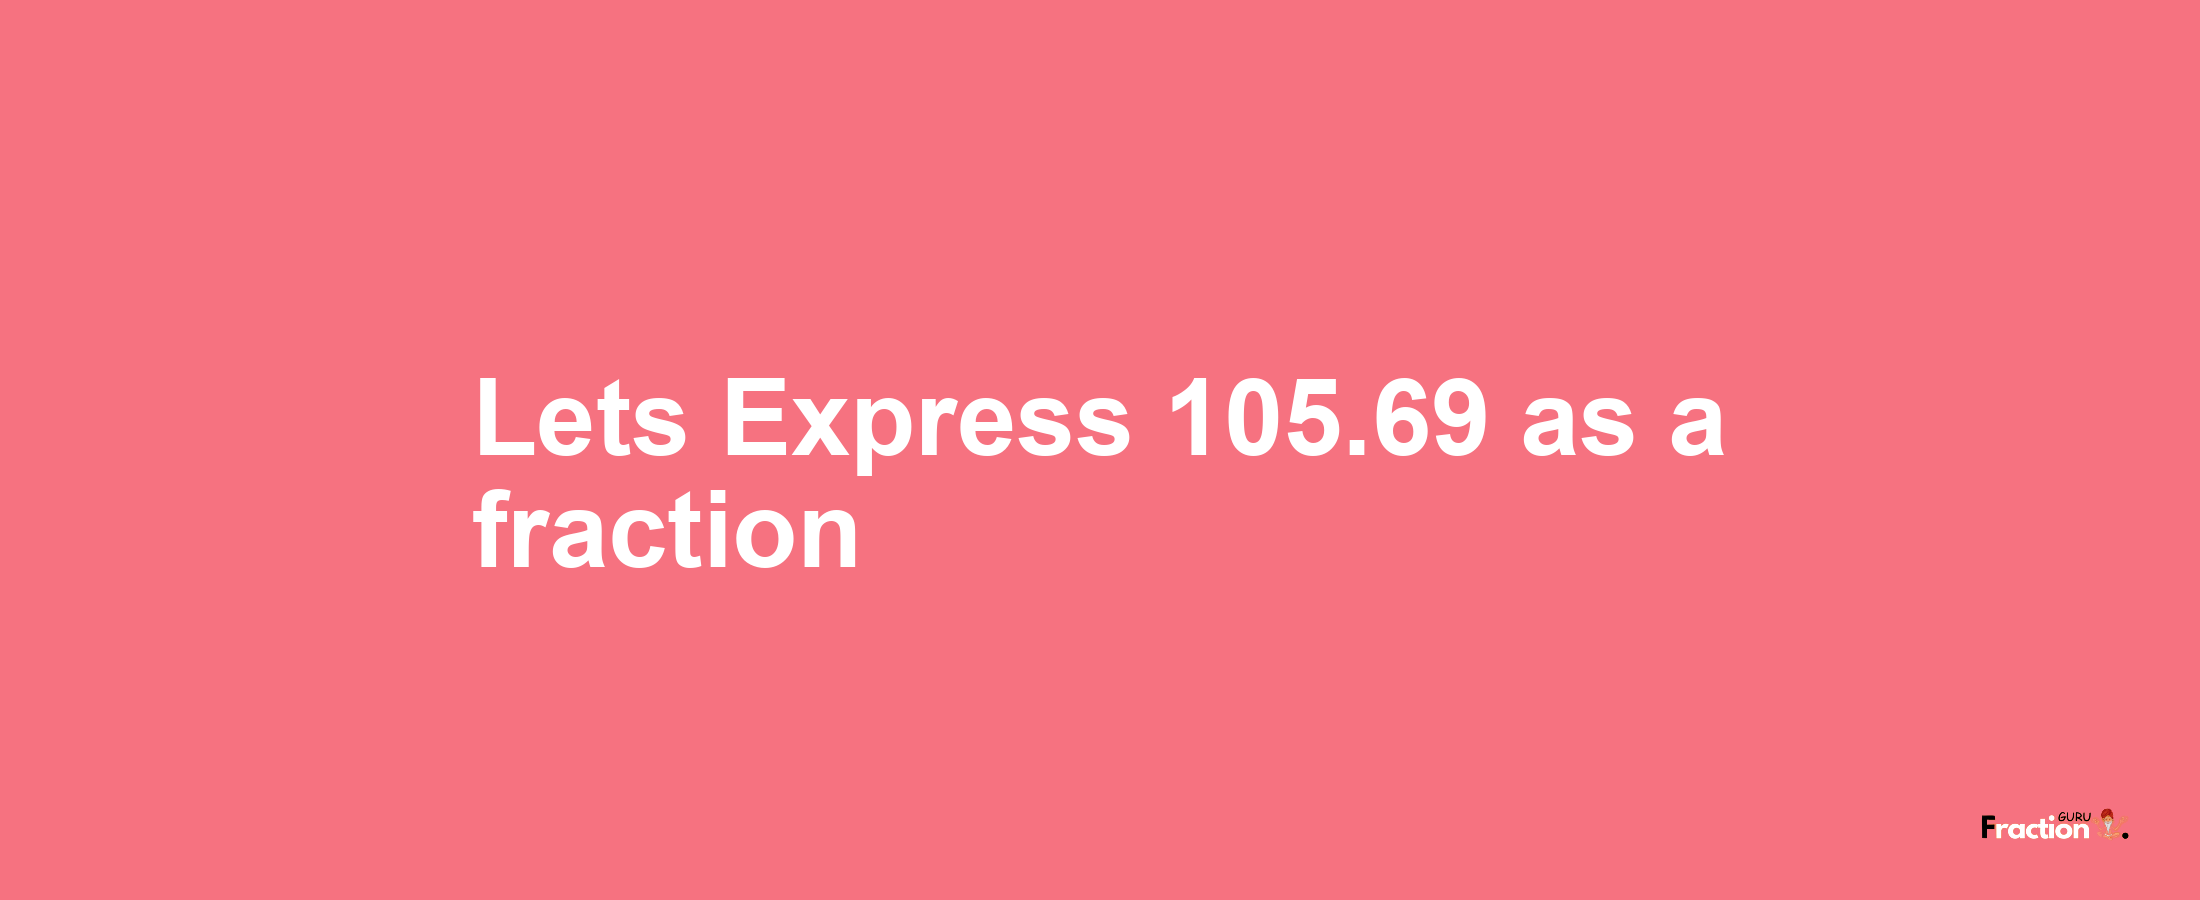 Lets Express 105.69 as afraction